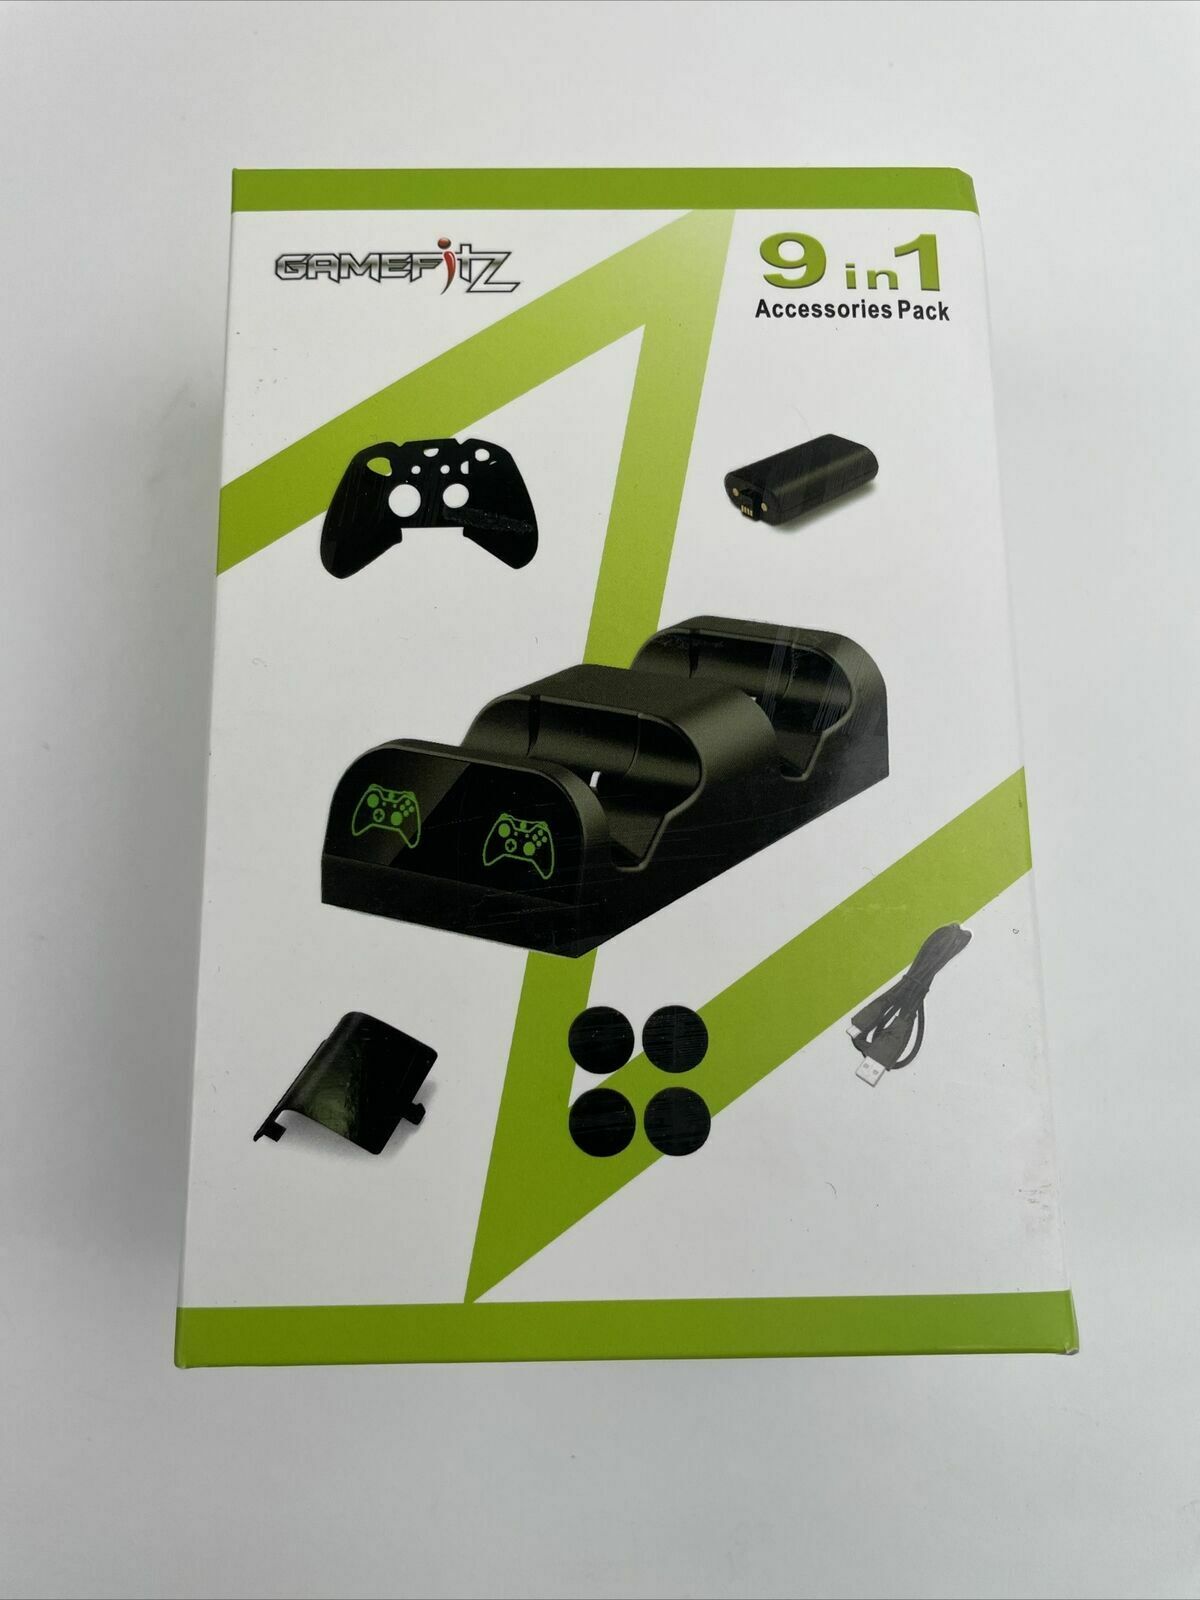 GameFitz 9 in 1 Accessories Pack for the Xbox One GF9-002, Black